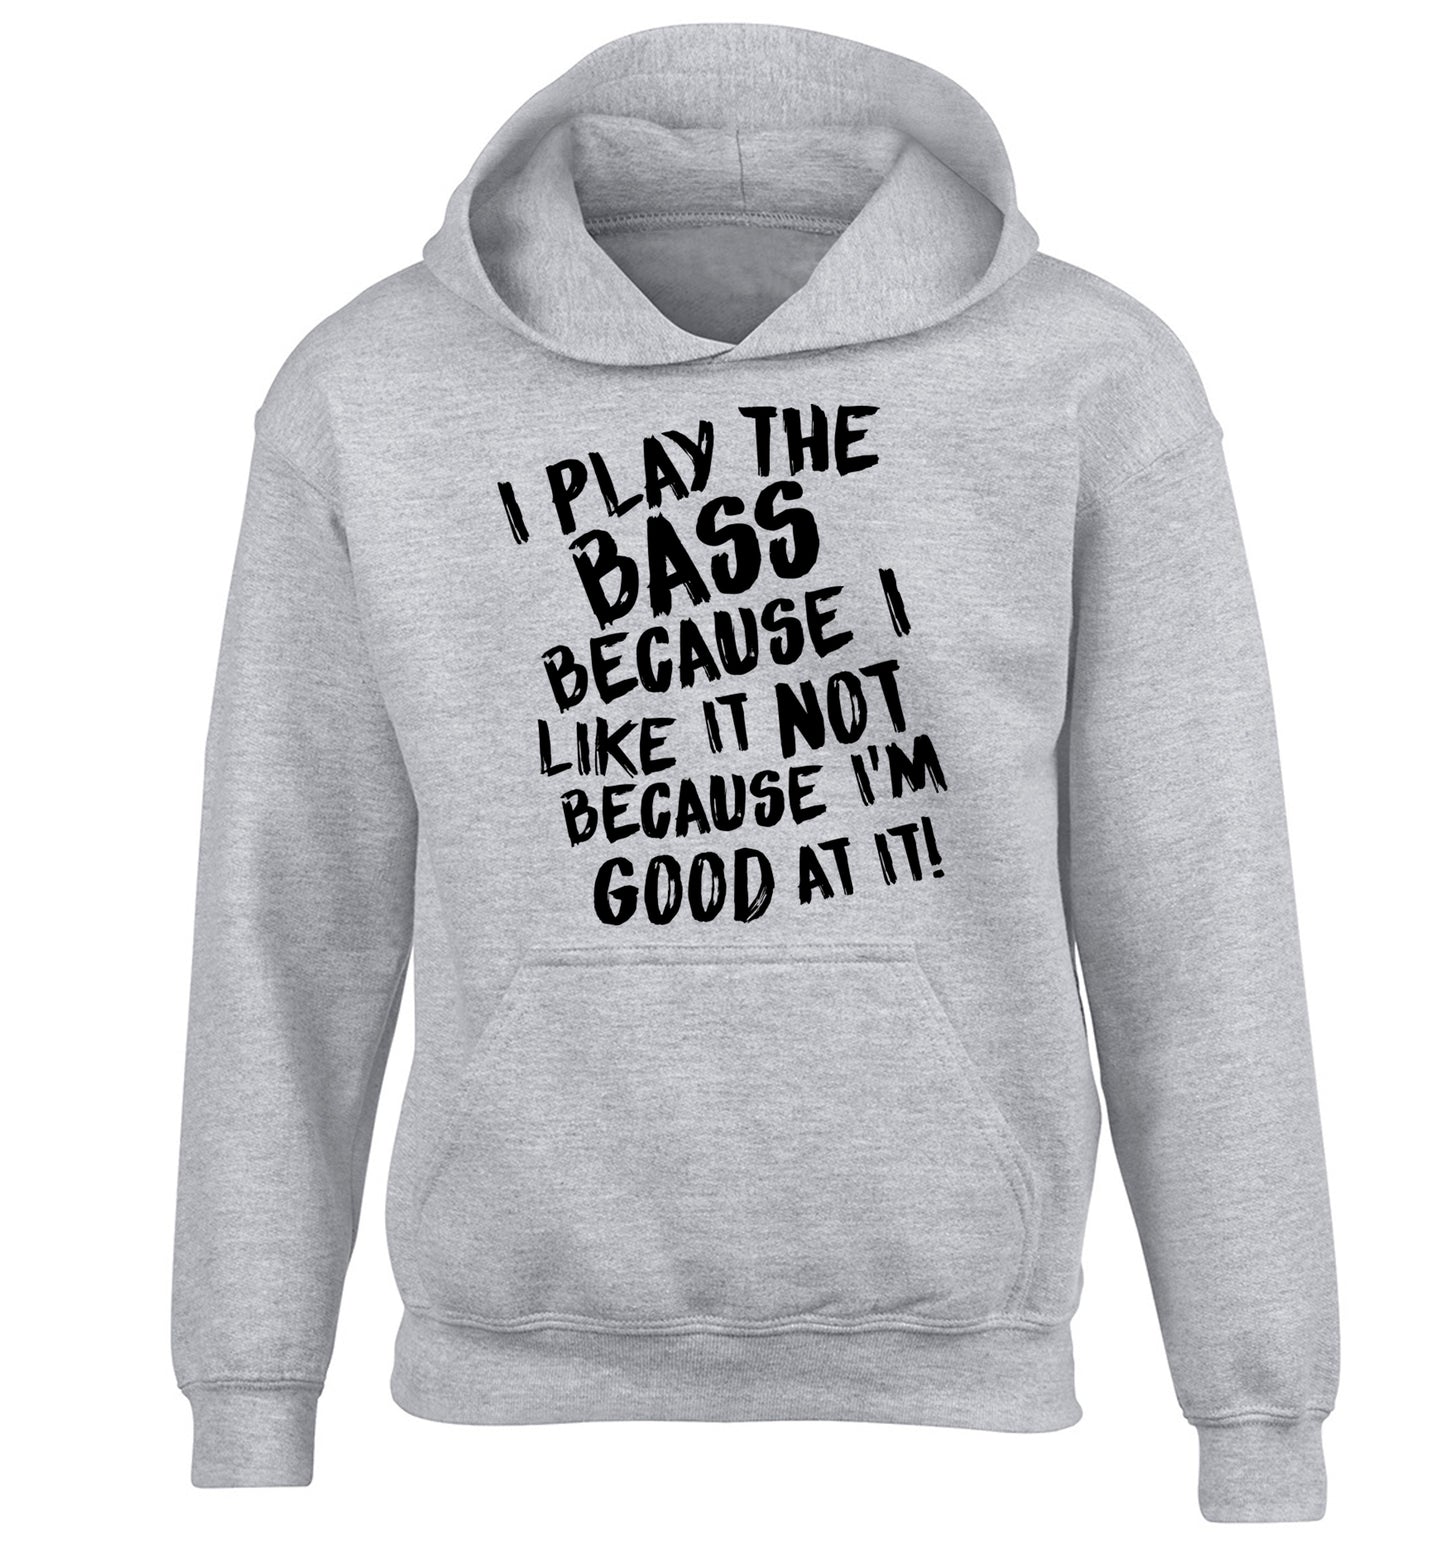 I play the bass because I like it not because I'm good at it children's grey hoodie 12-14 Years